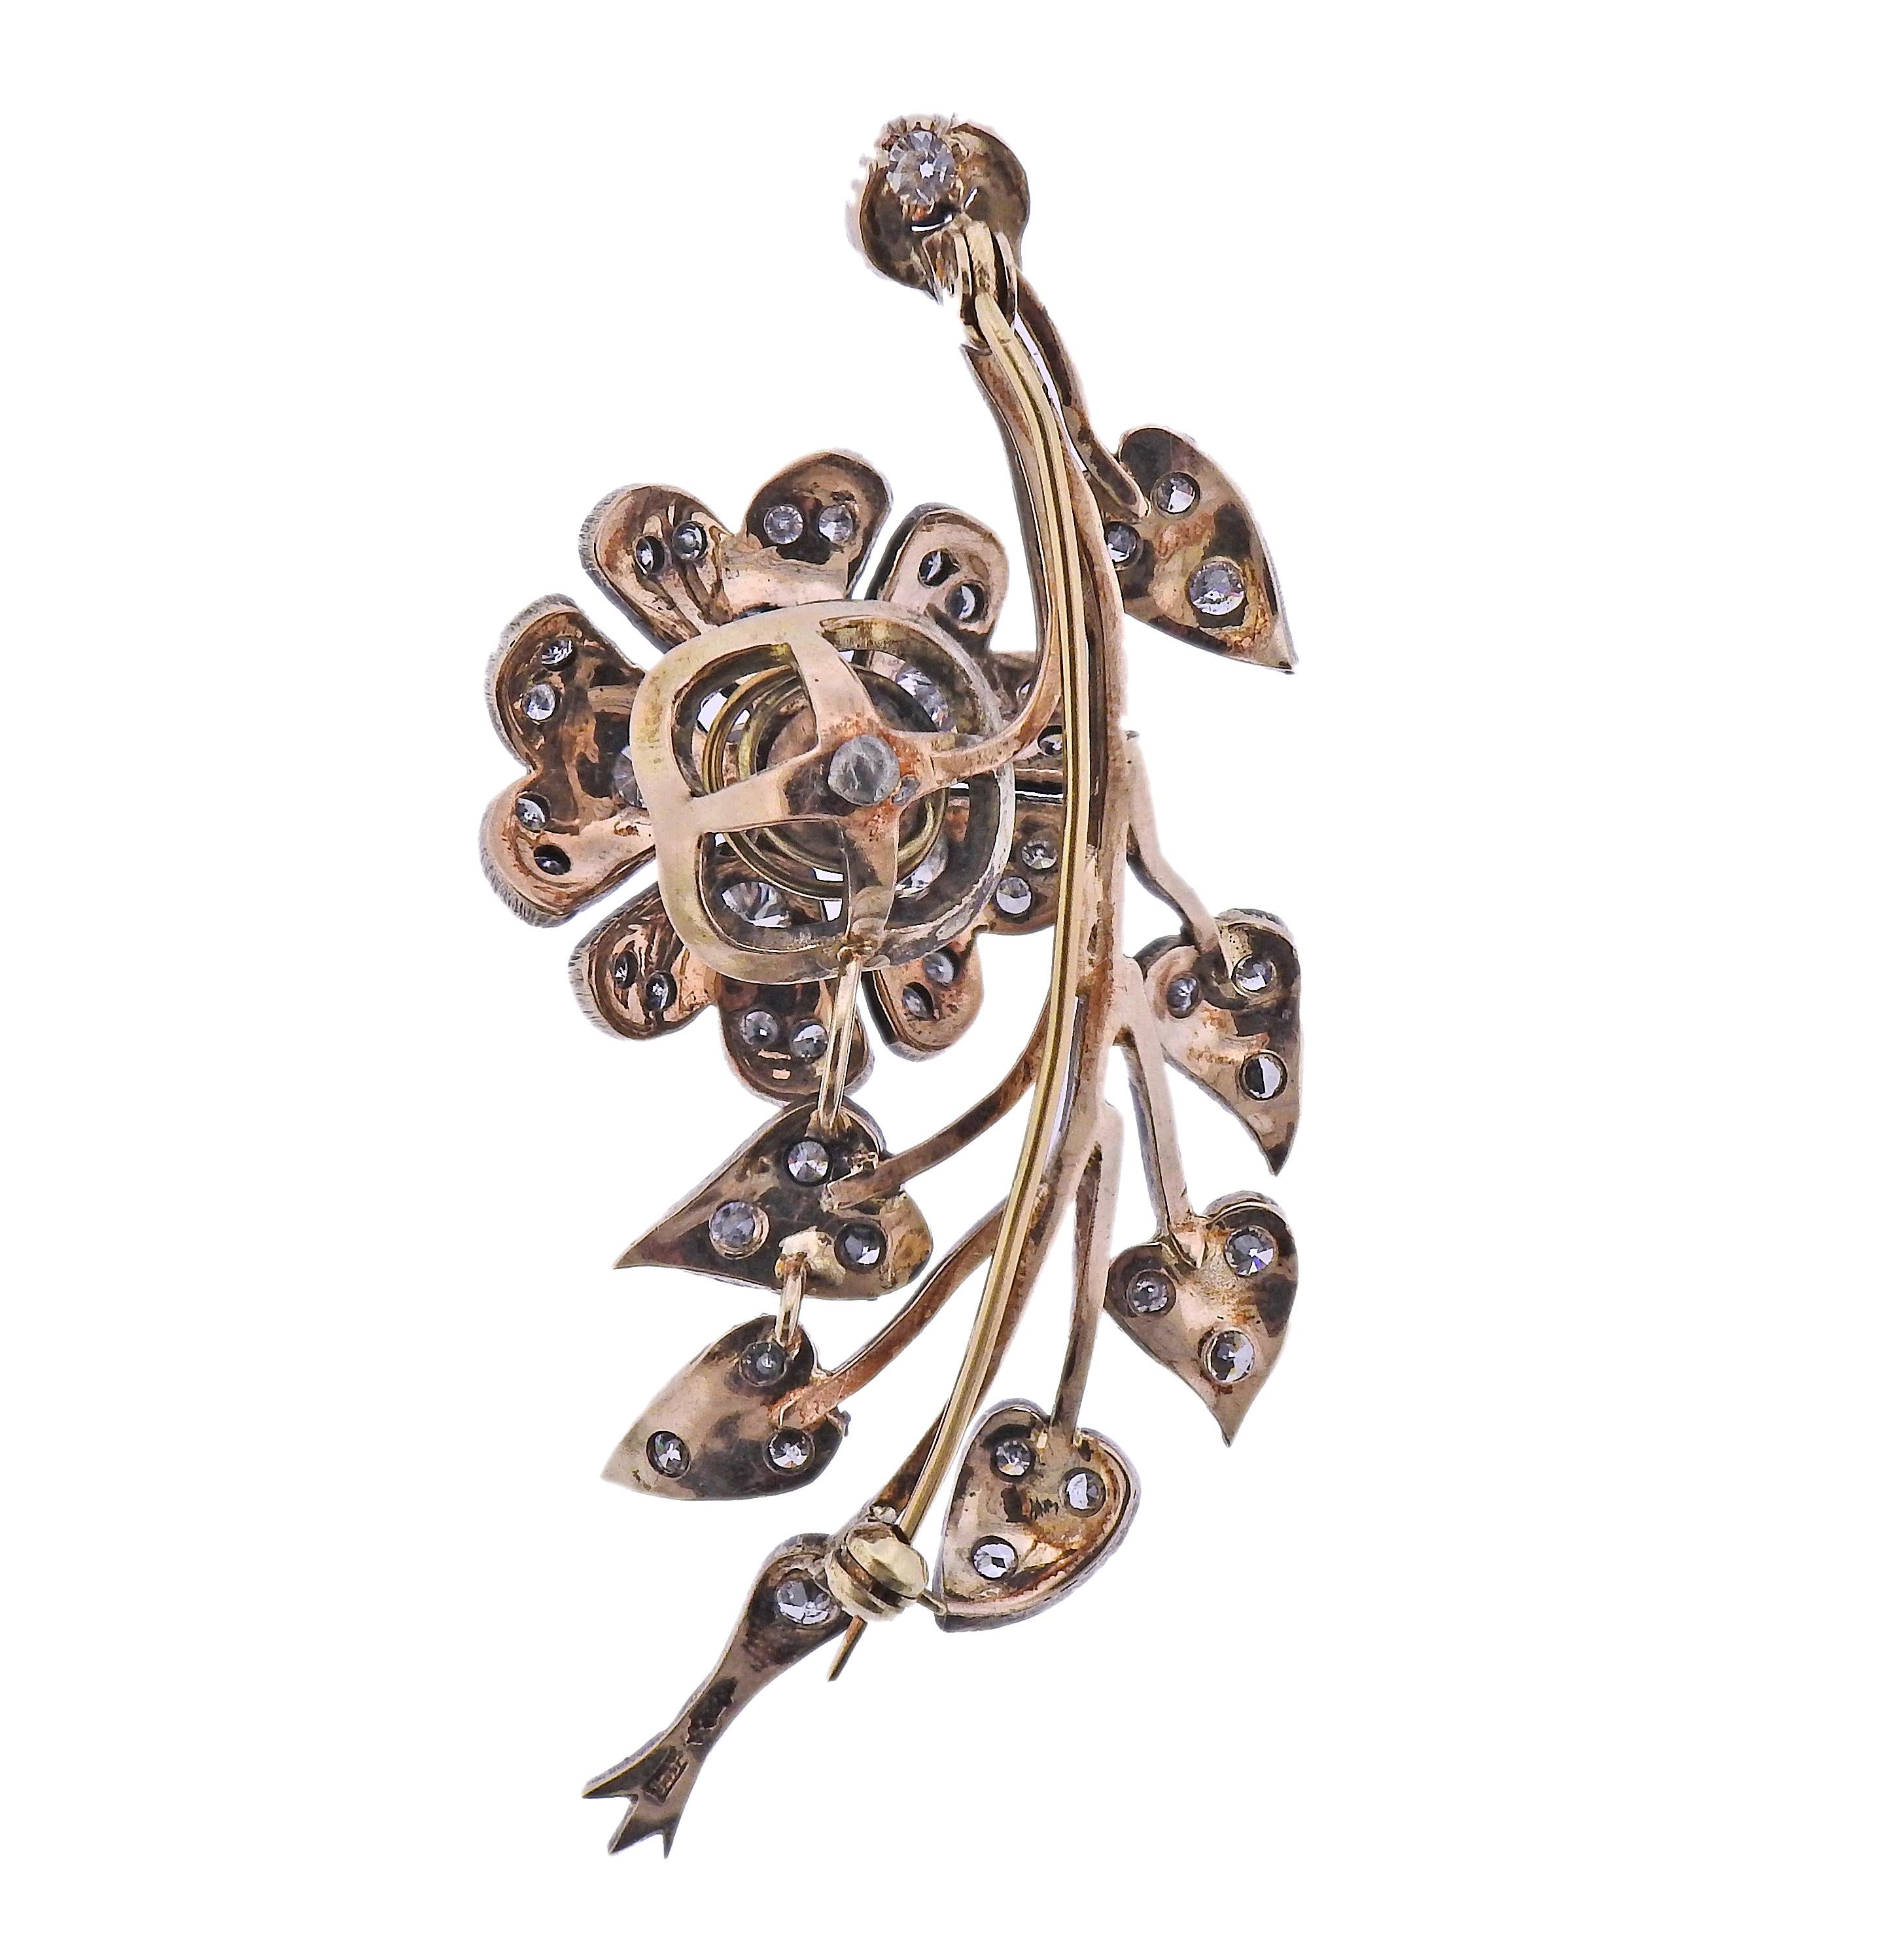 Antique 14k gold and silver flower brooch, with approx. 3.30ctw in diamonds. Brooch measures 2.75